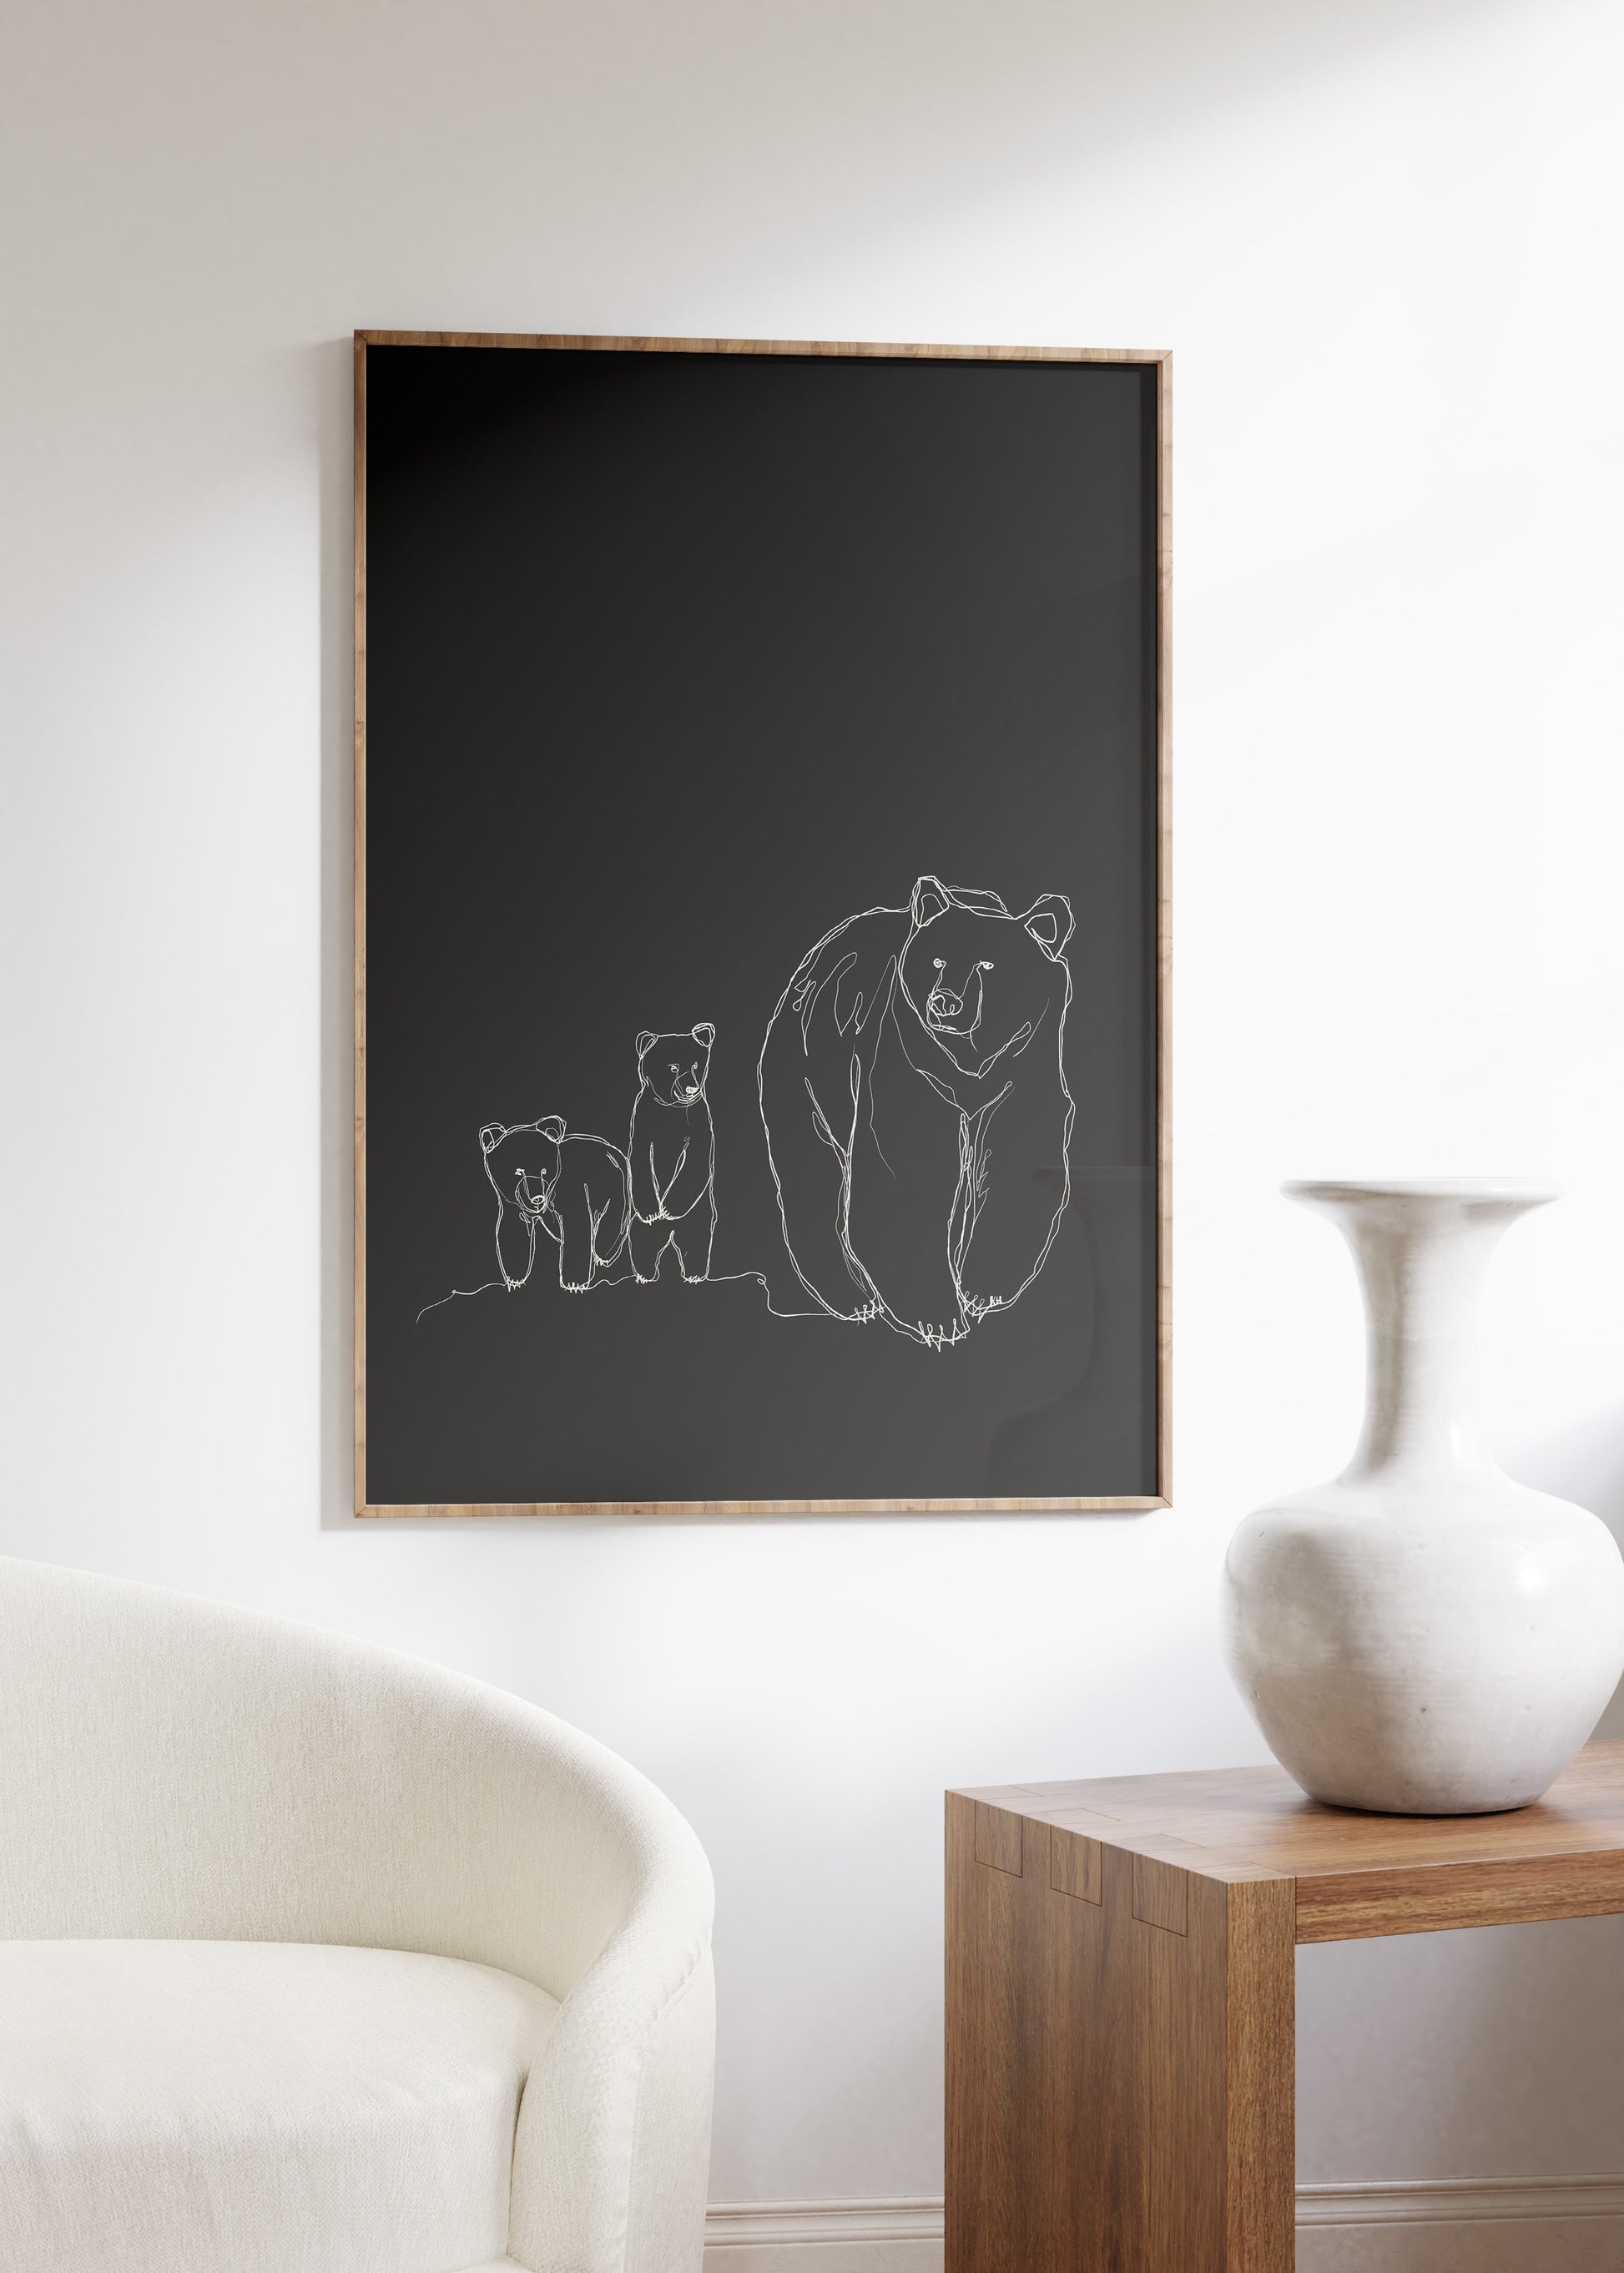 mama bear and cubs black and white line art framed in wood